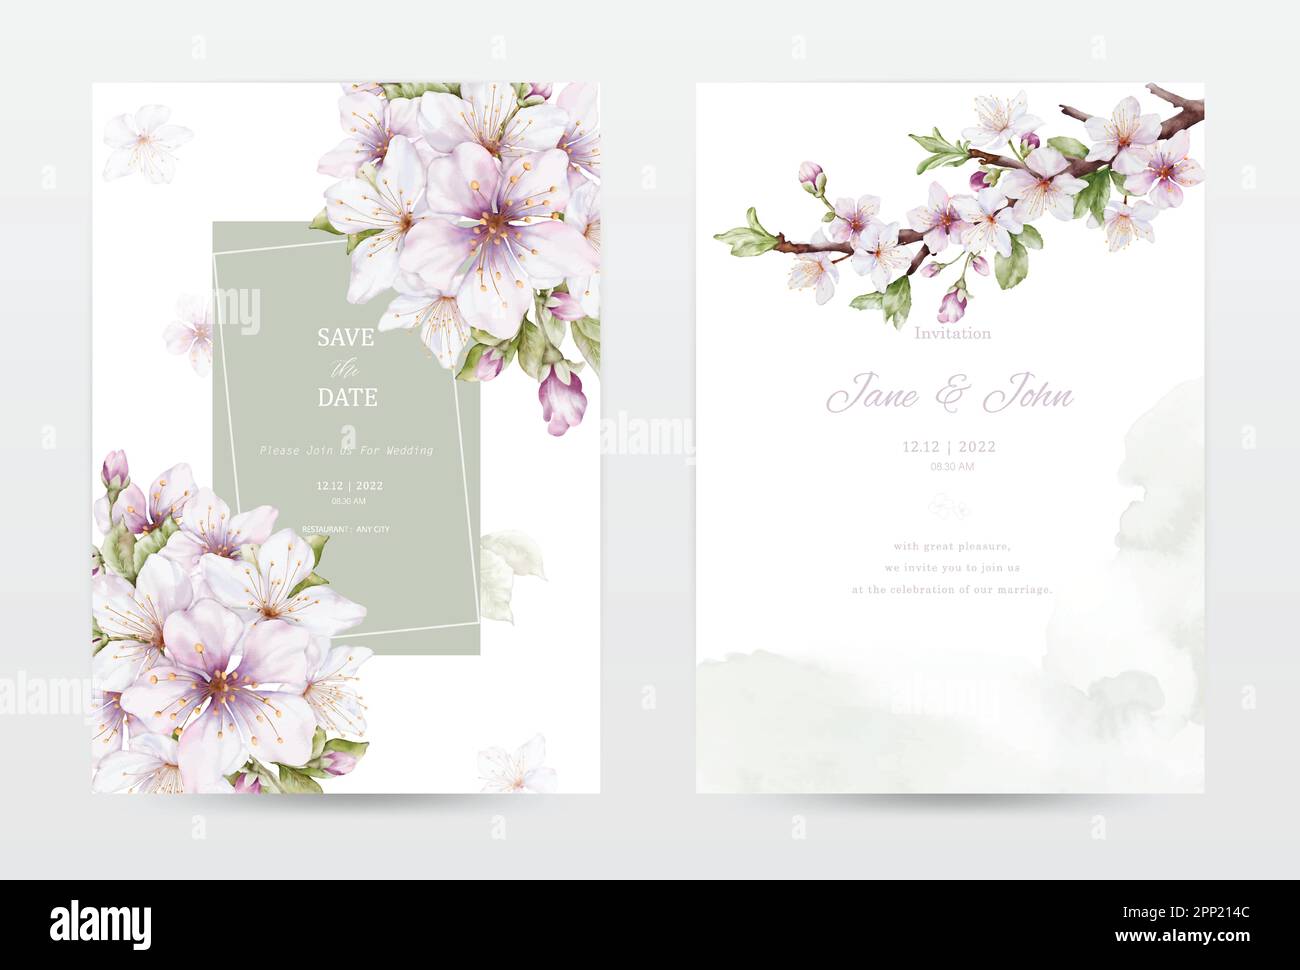 Watercolor cherry blossoms blooming invitation template cards set. Green collection watercolor flowers vector is suitable for Wedding invitations, sav Stock Vector